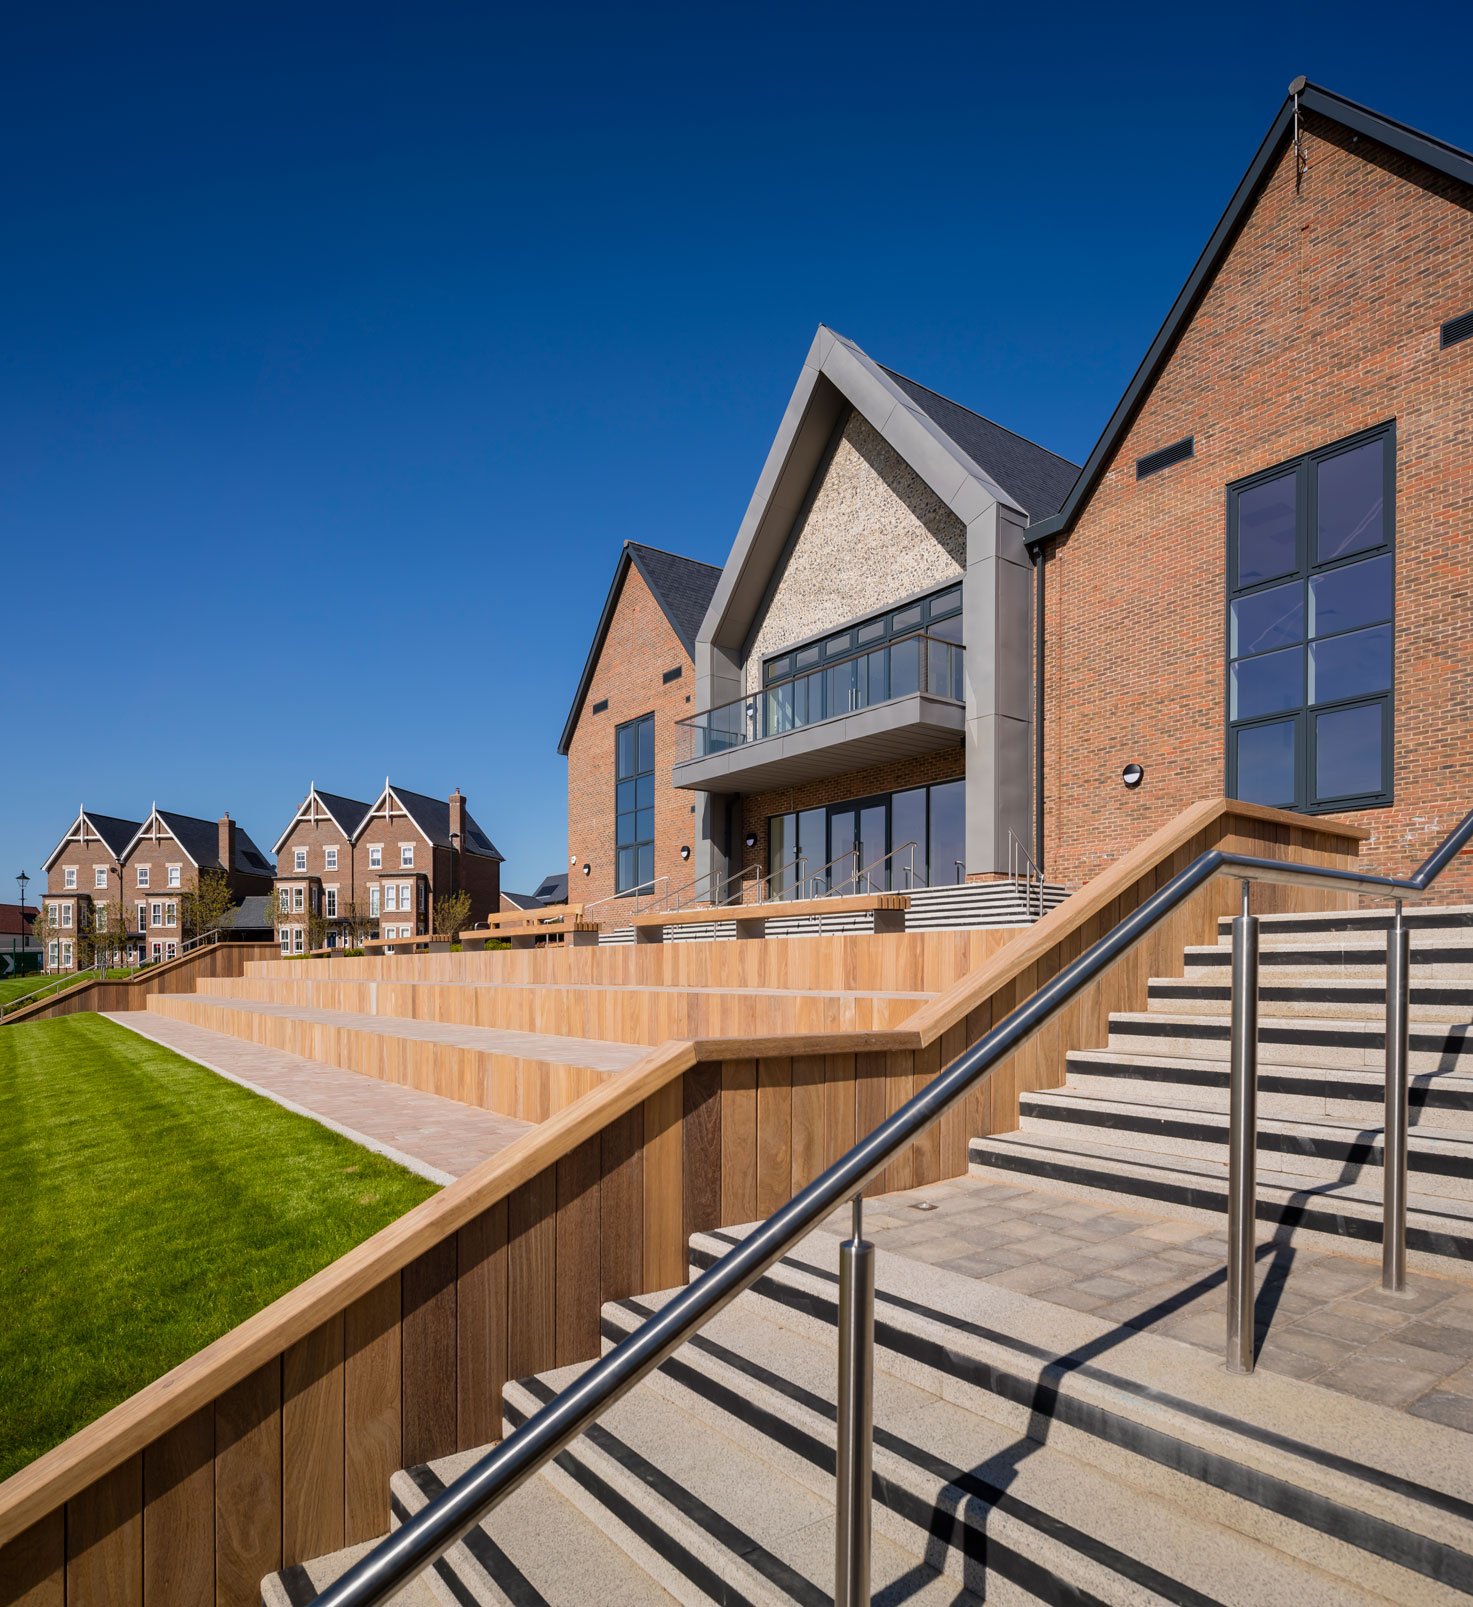 exterior-croudace-homes-kings-hill-photography-community-centre.jpg